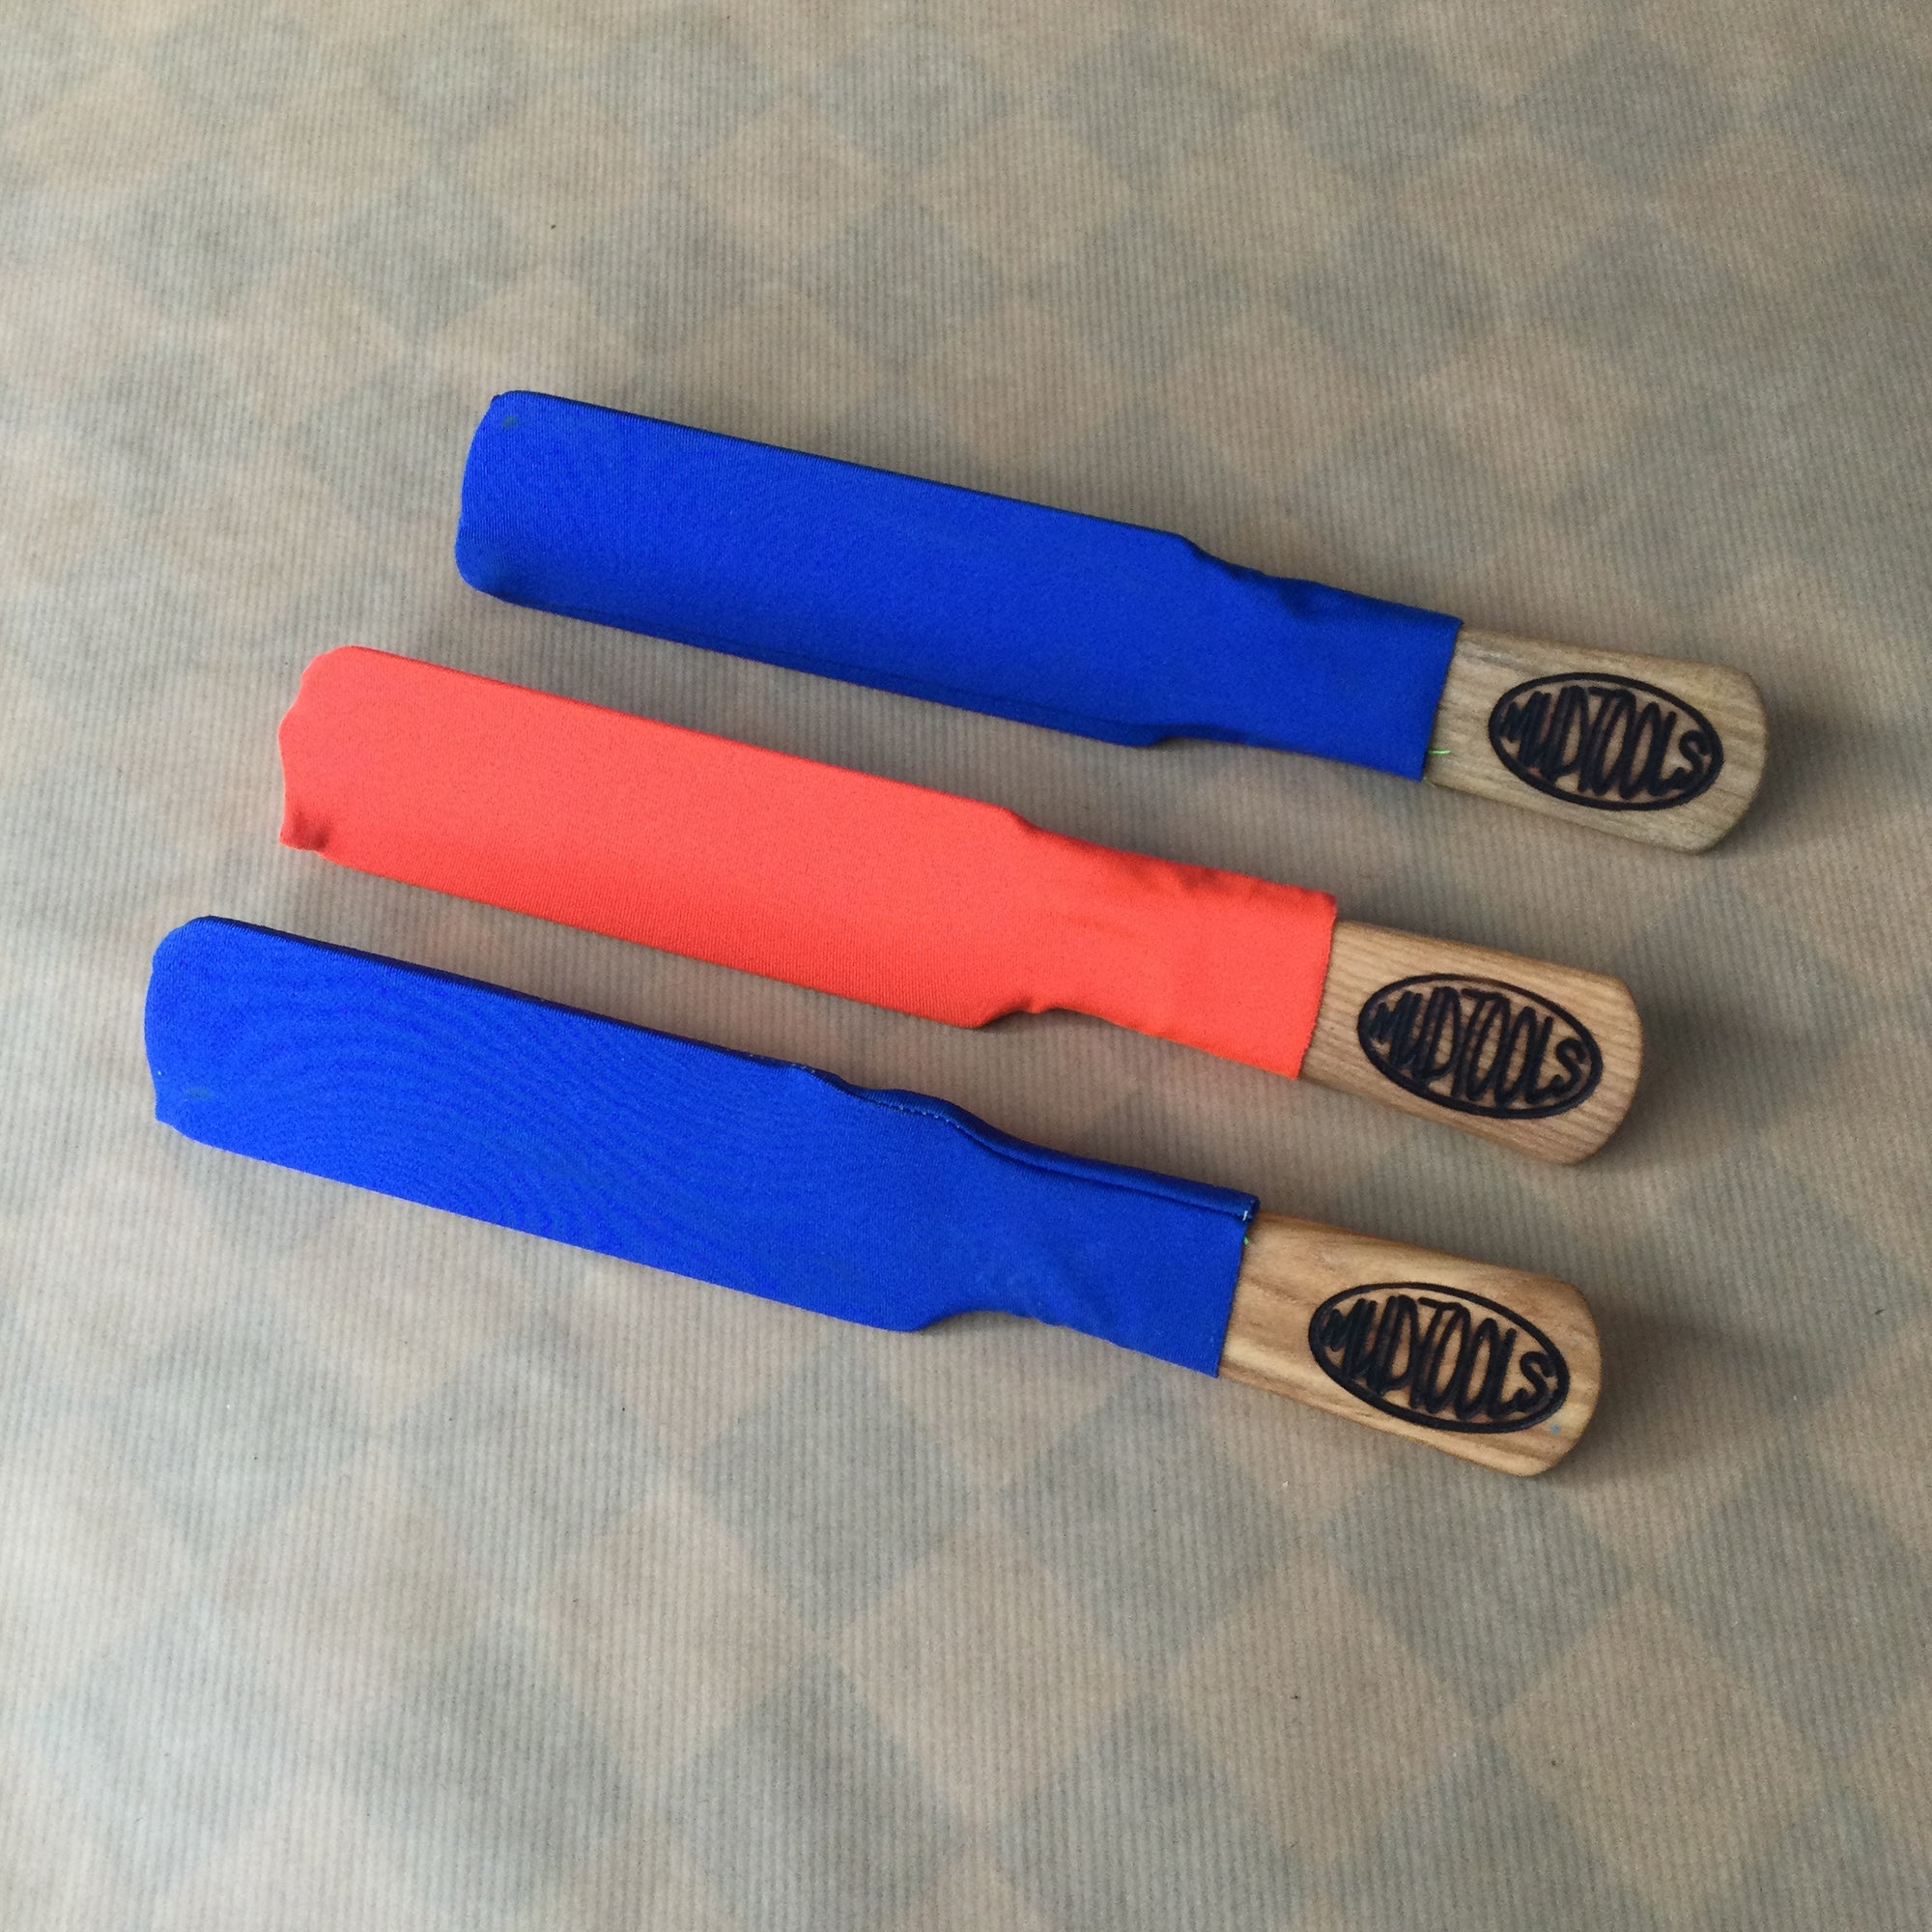 Mud Tools ~ Wooden Paddle and Sleeve